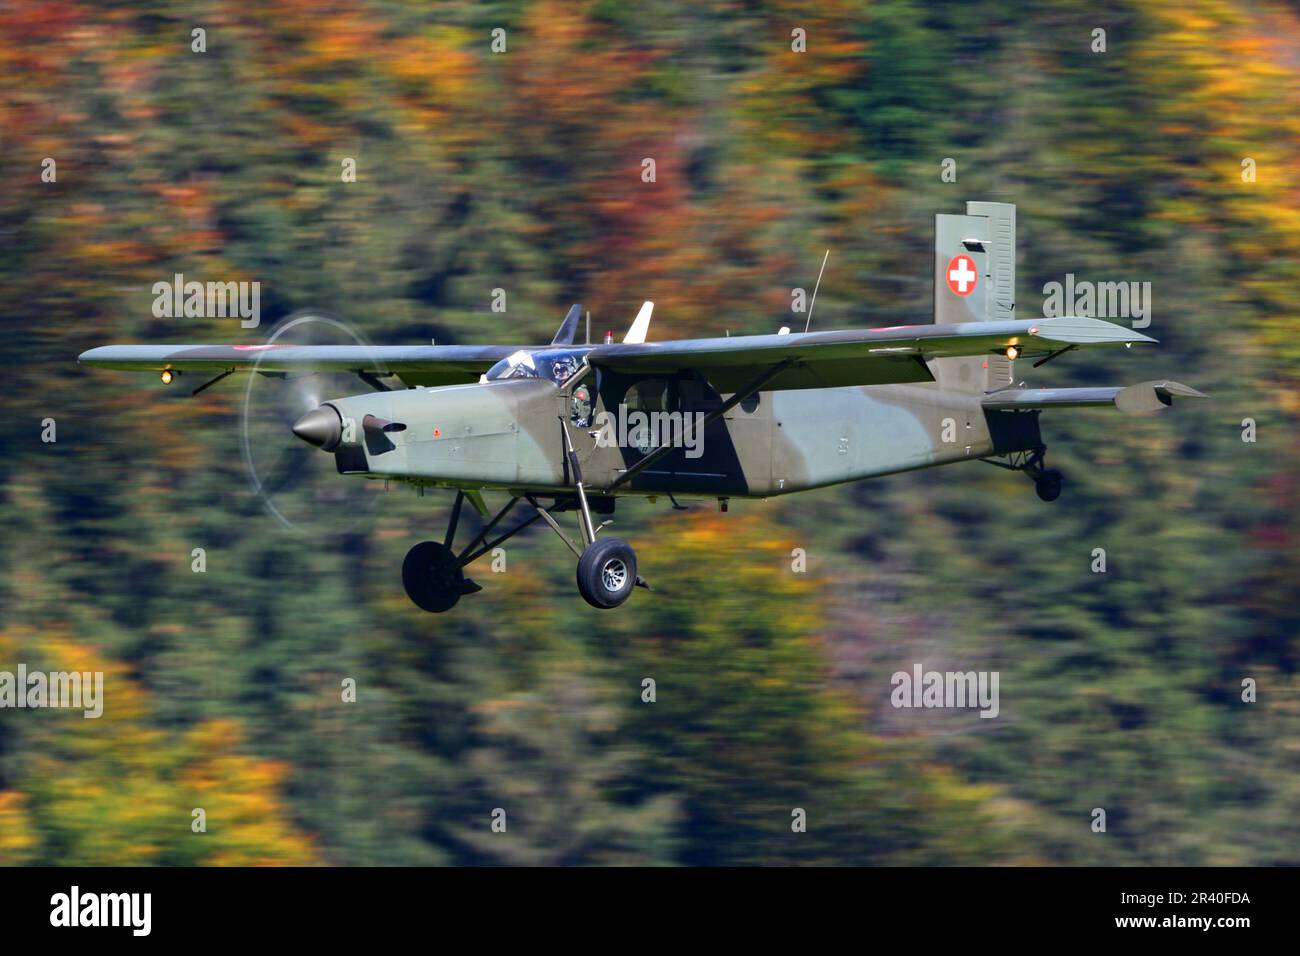 A PC-6/B2-H2 Turbo Porter transport aircraft of Swiss Air Force landing. Stock Photo